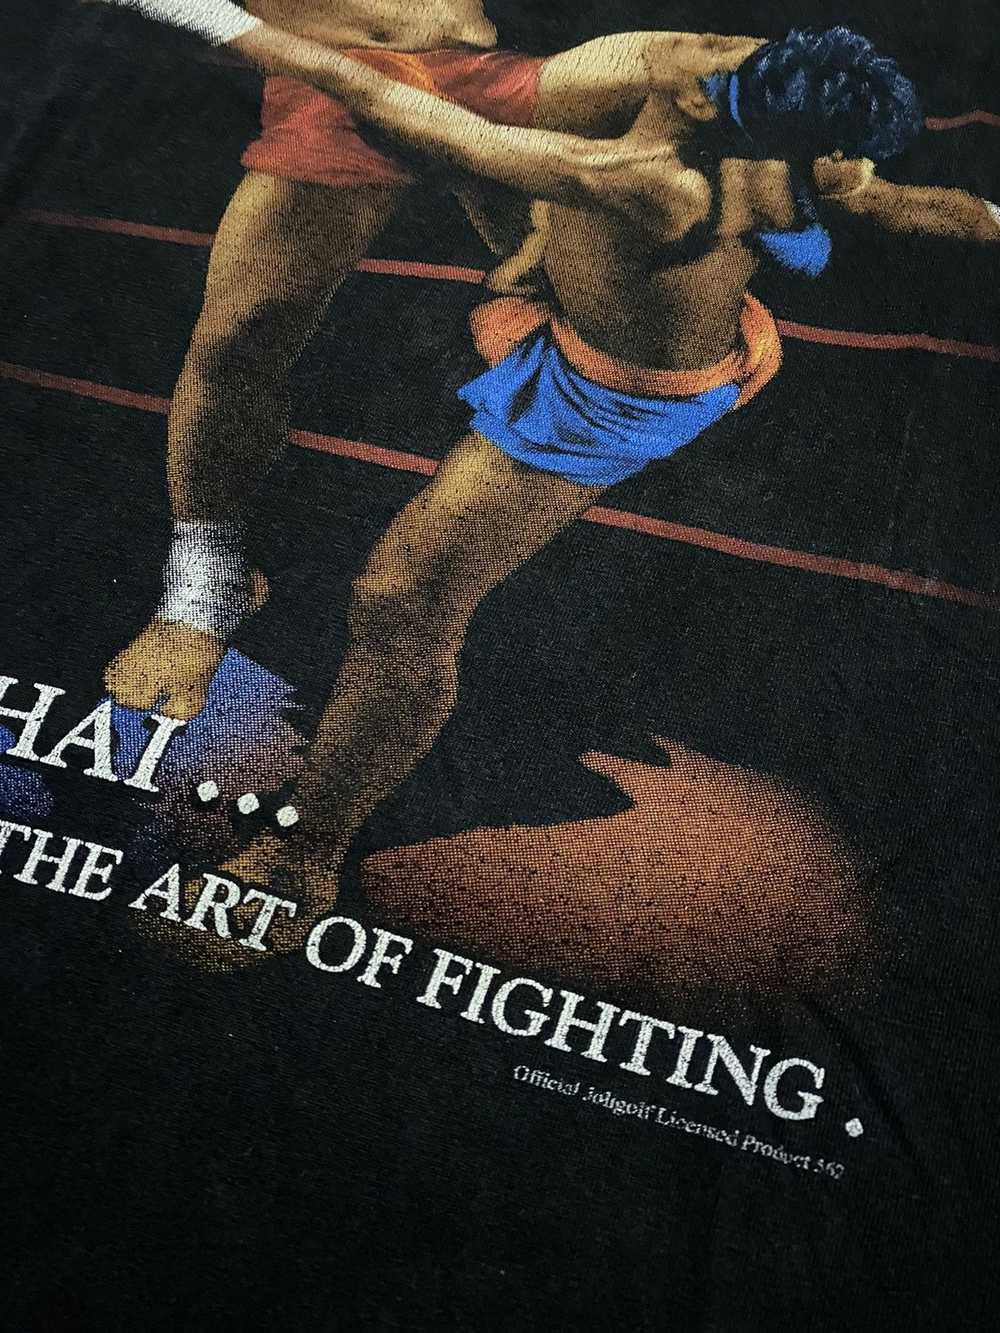 Vintage Thailand Muay Thai The Art of Fighting t … - image 2